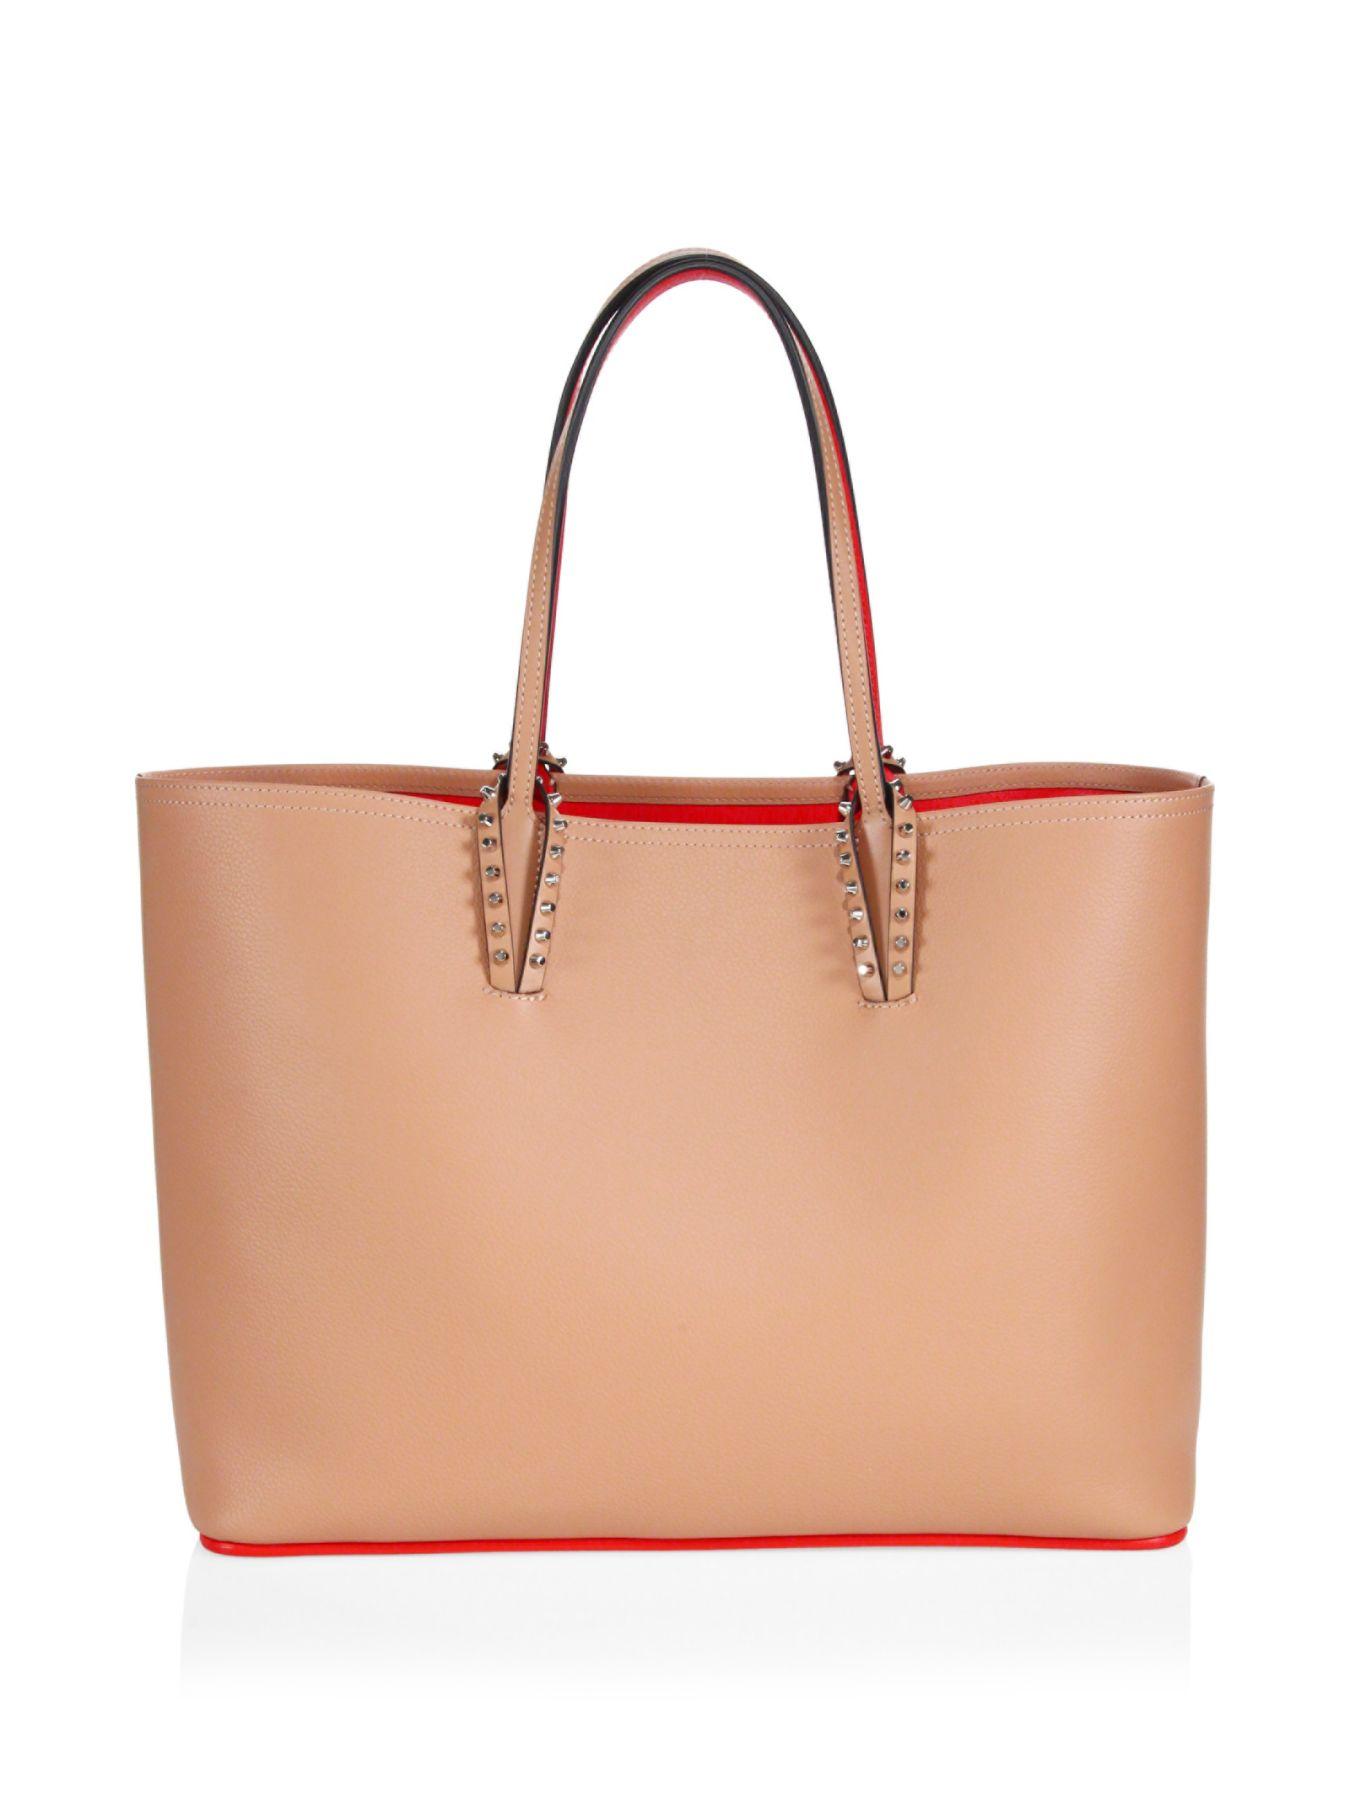 Christian Louboutin Cabata Leather Tote in Natural